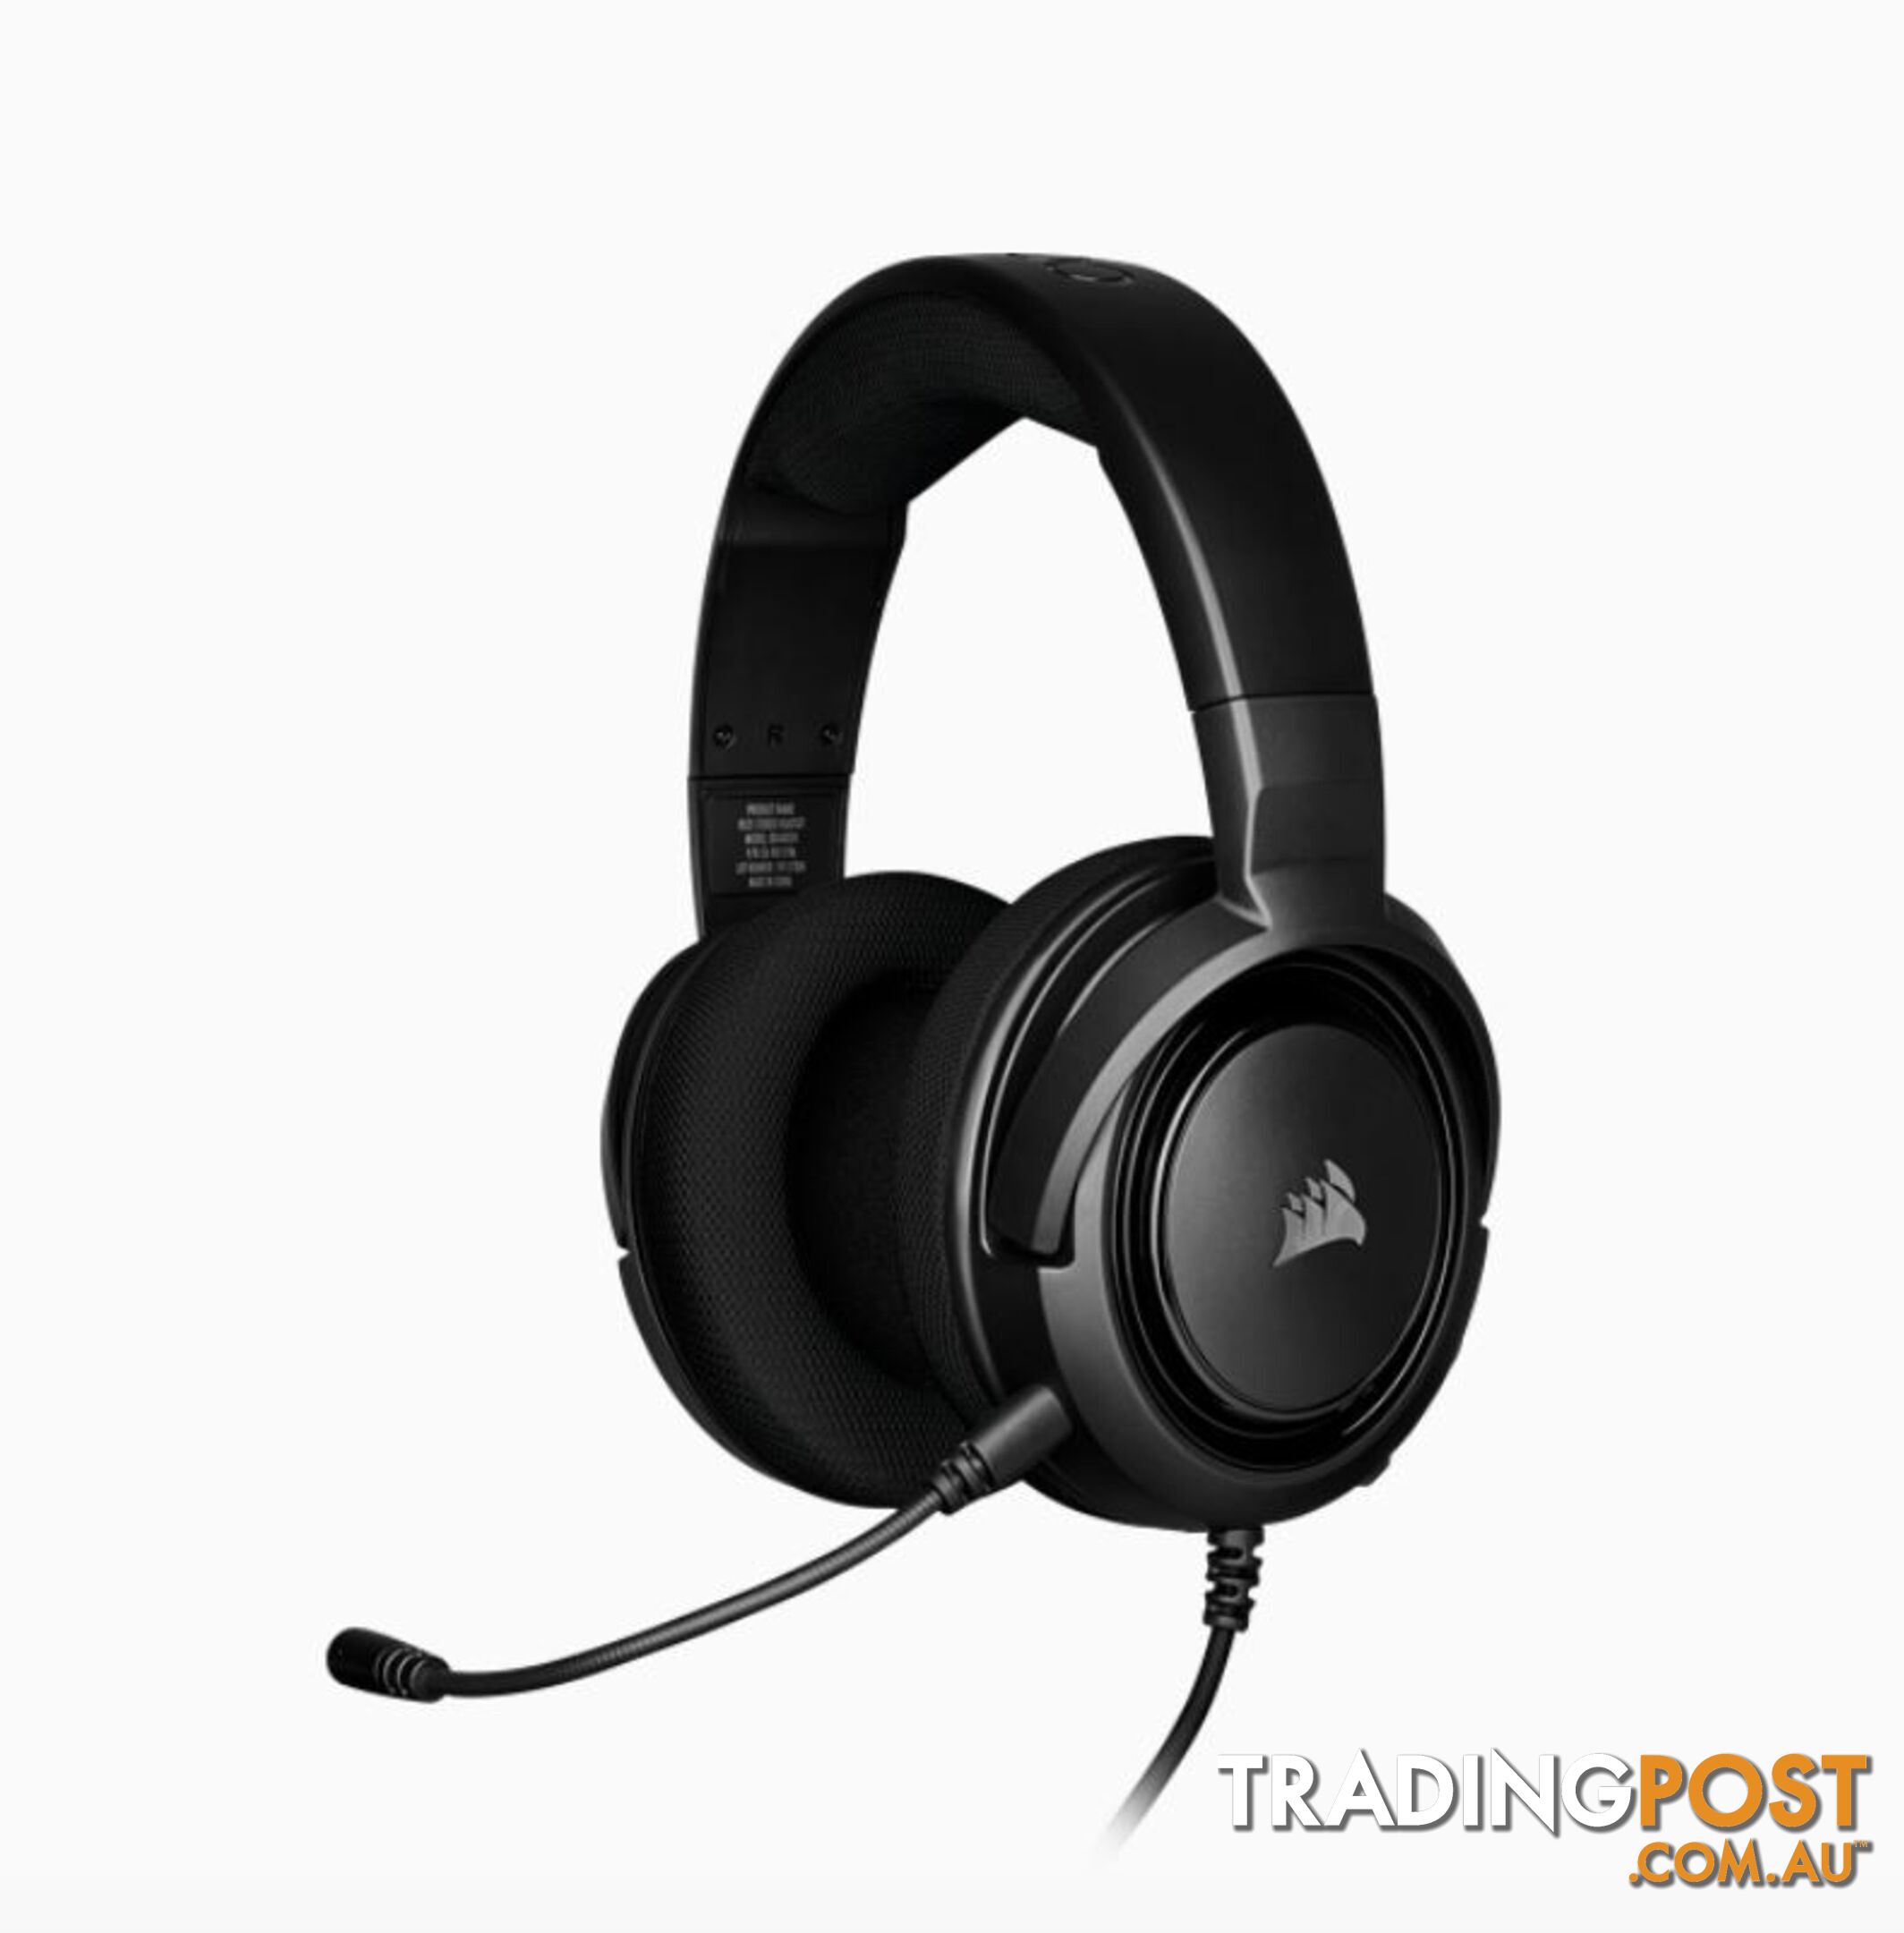 Corsair HS35 STEREO Gaming Headset Discord Certified, Clear Sound, and Plush Memory Foam, Carbon - SPCA-HS35-CB